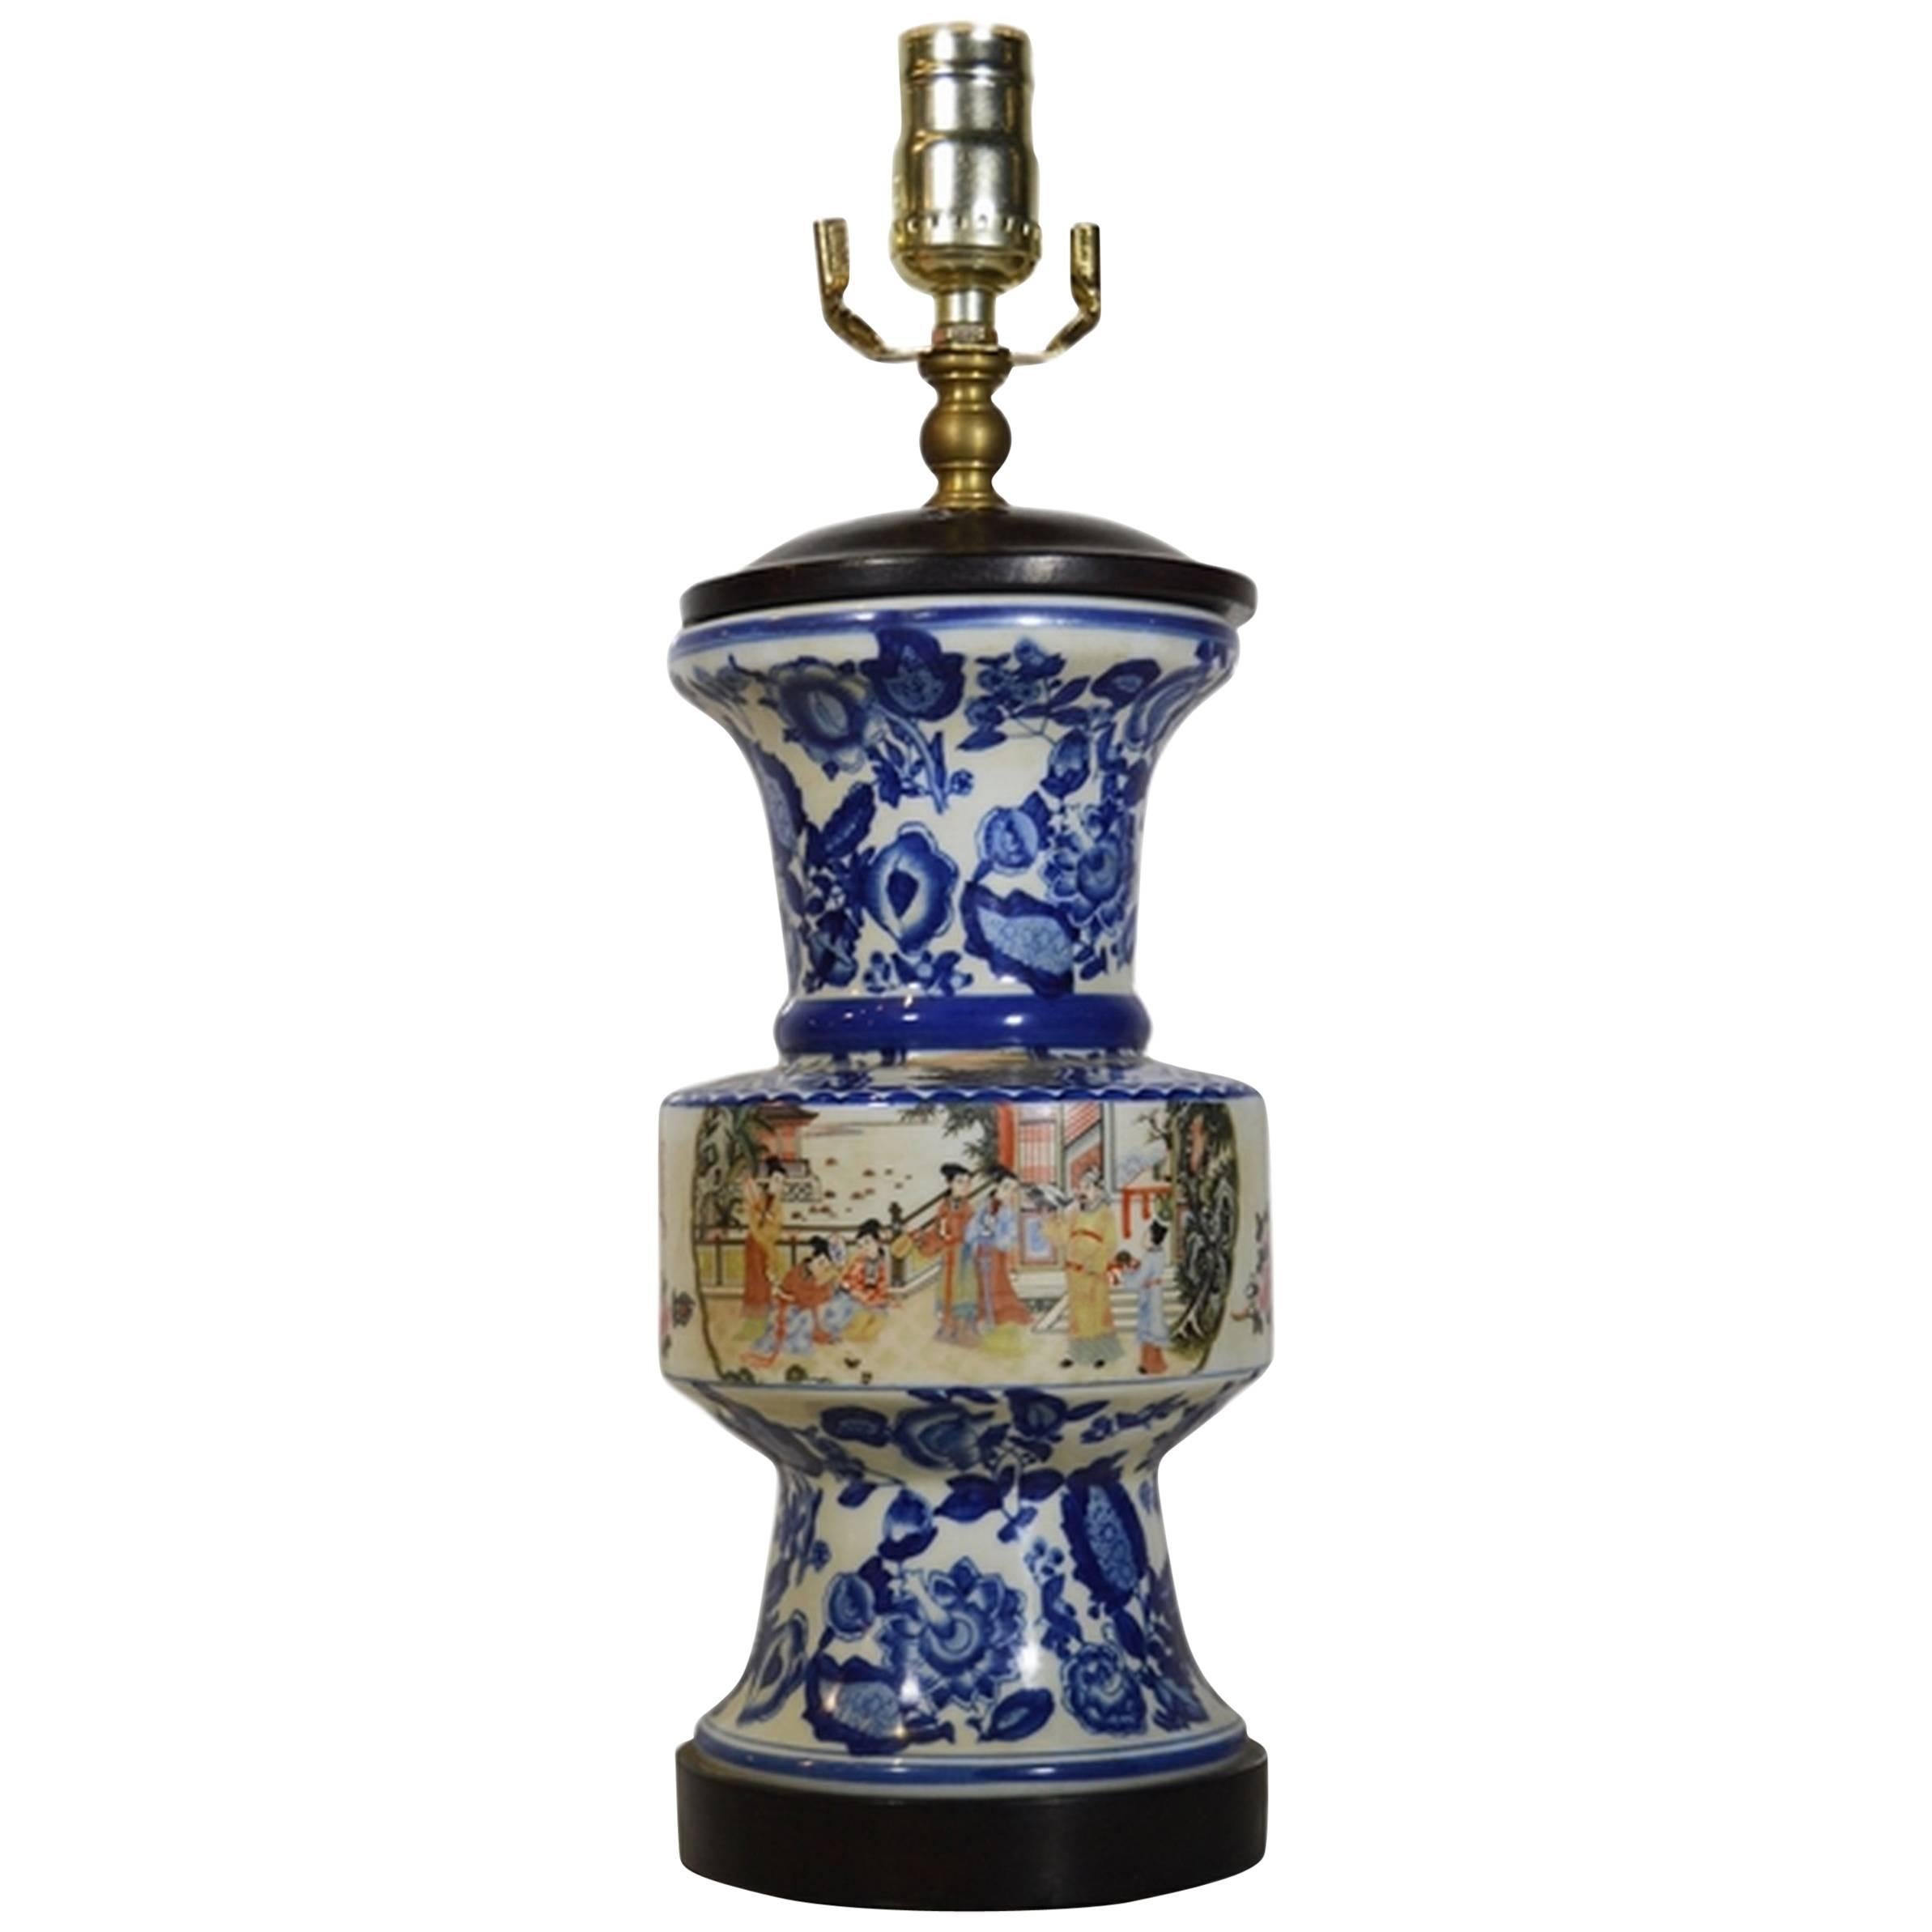 Vintage Chinese Hand-Painted Porcelain Lamp with Characters from the 1970s